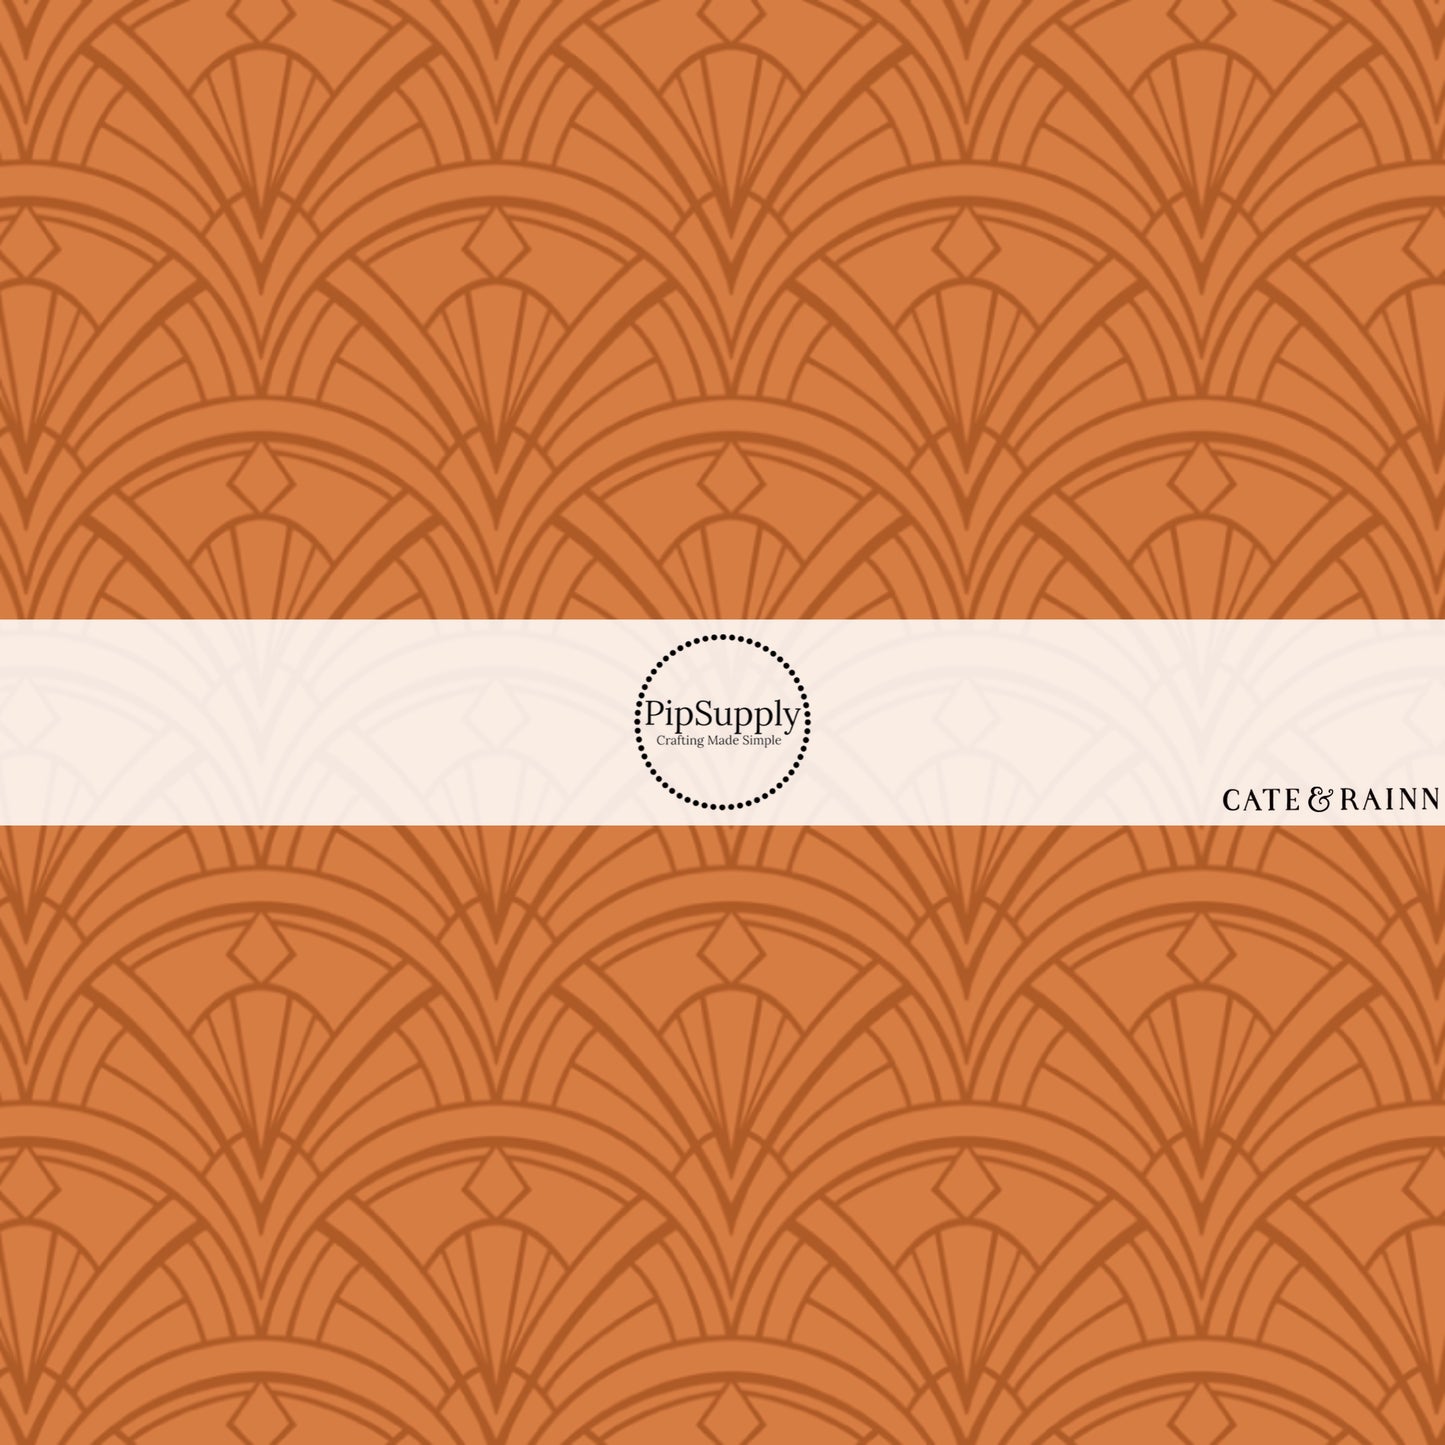 These jungle pattern faux leather sheets contain the following design elements: tropical art deco patterns. Our CPSIA compliant faux leather sheets or rolls can be used for all types of crafting projects.